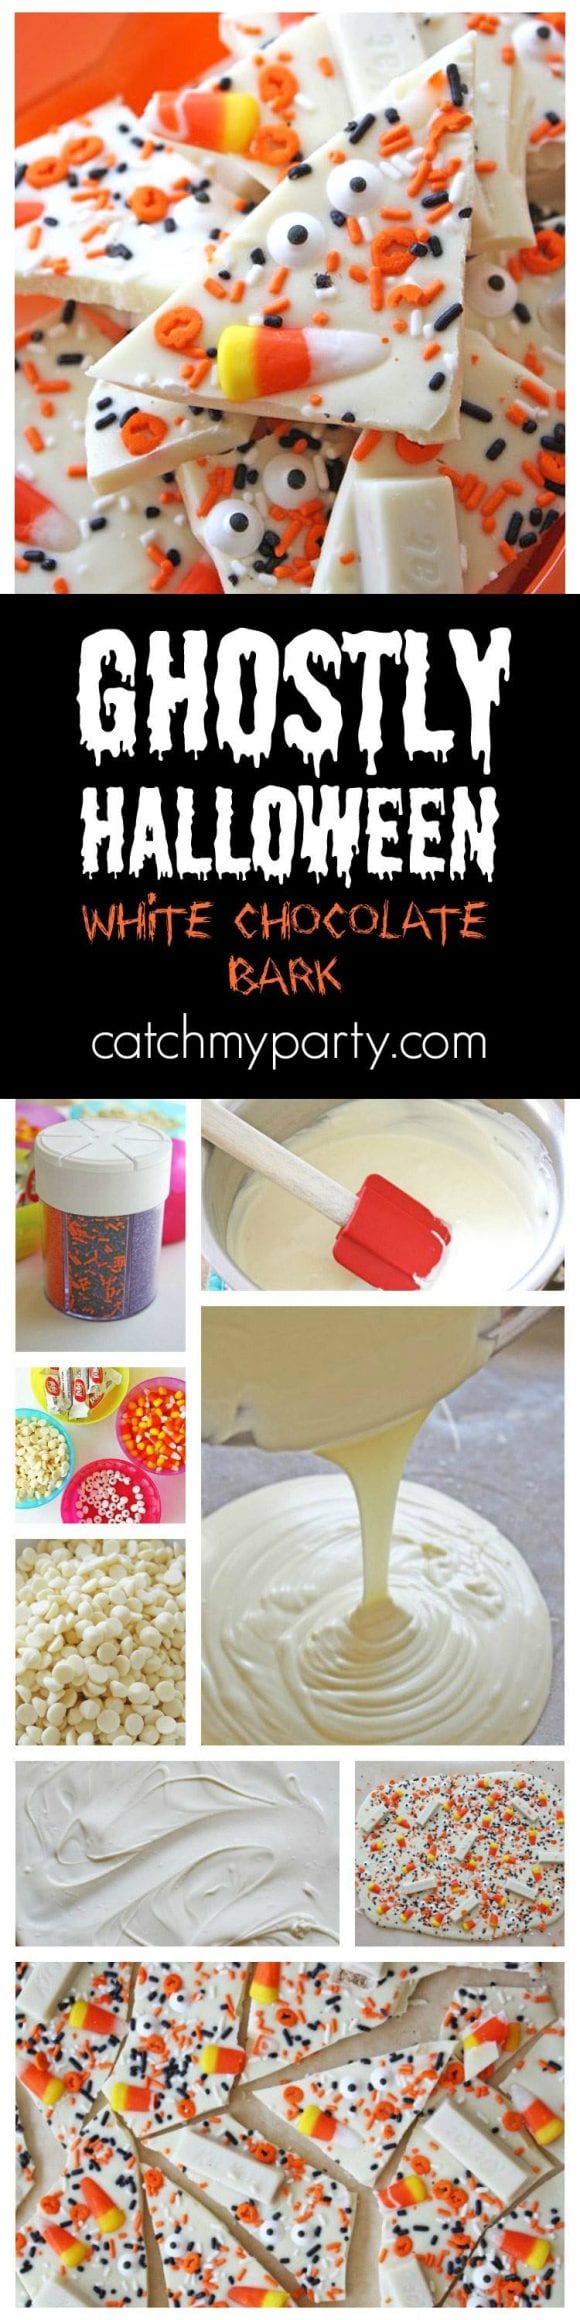 Ghostly Halloween White Chocolate Bark | CatchMyParty.com